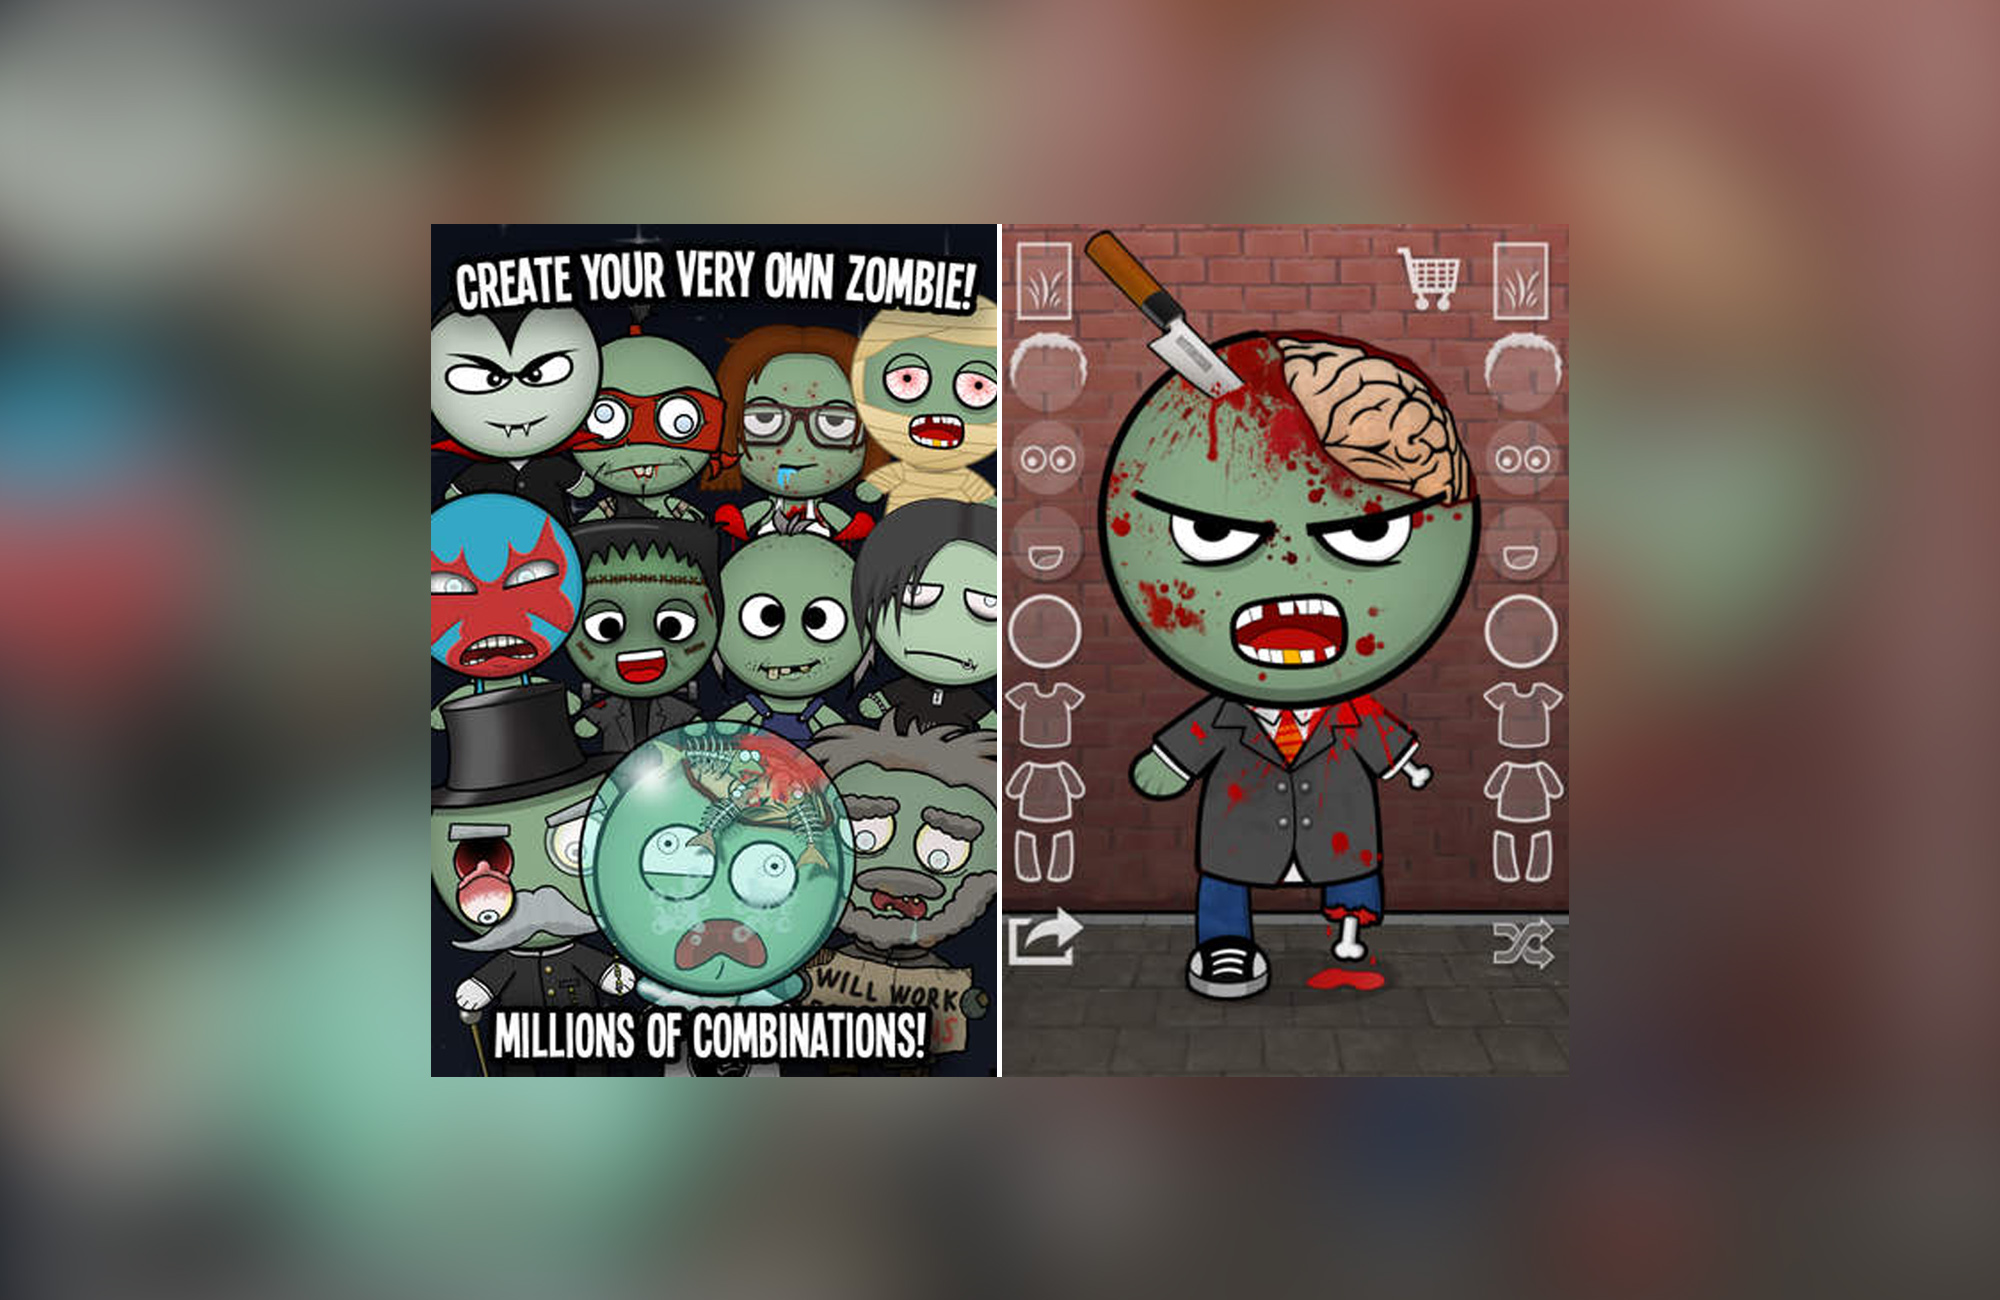 PHOTO: Make A Zombie by Skunk Brothers GmbH lets you design a zombie and then share it with friends through social media.